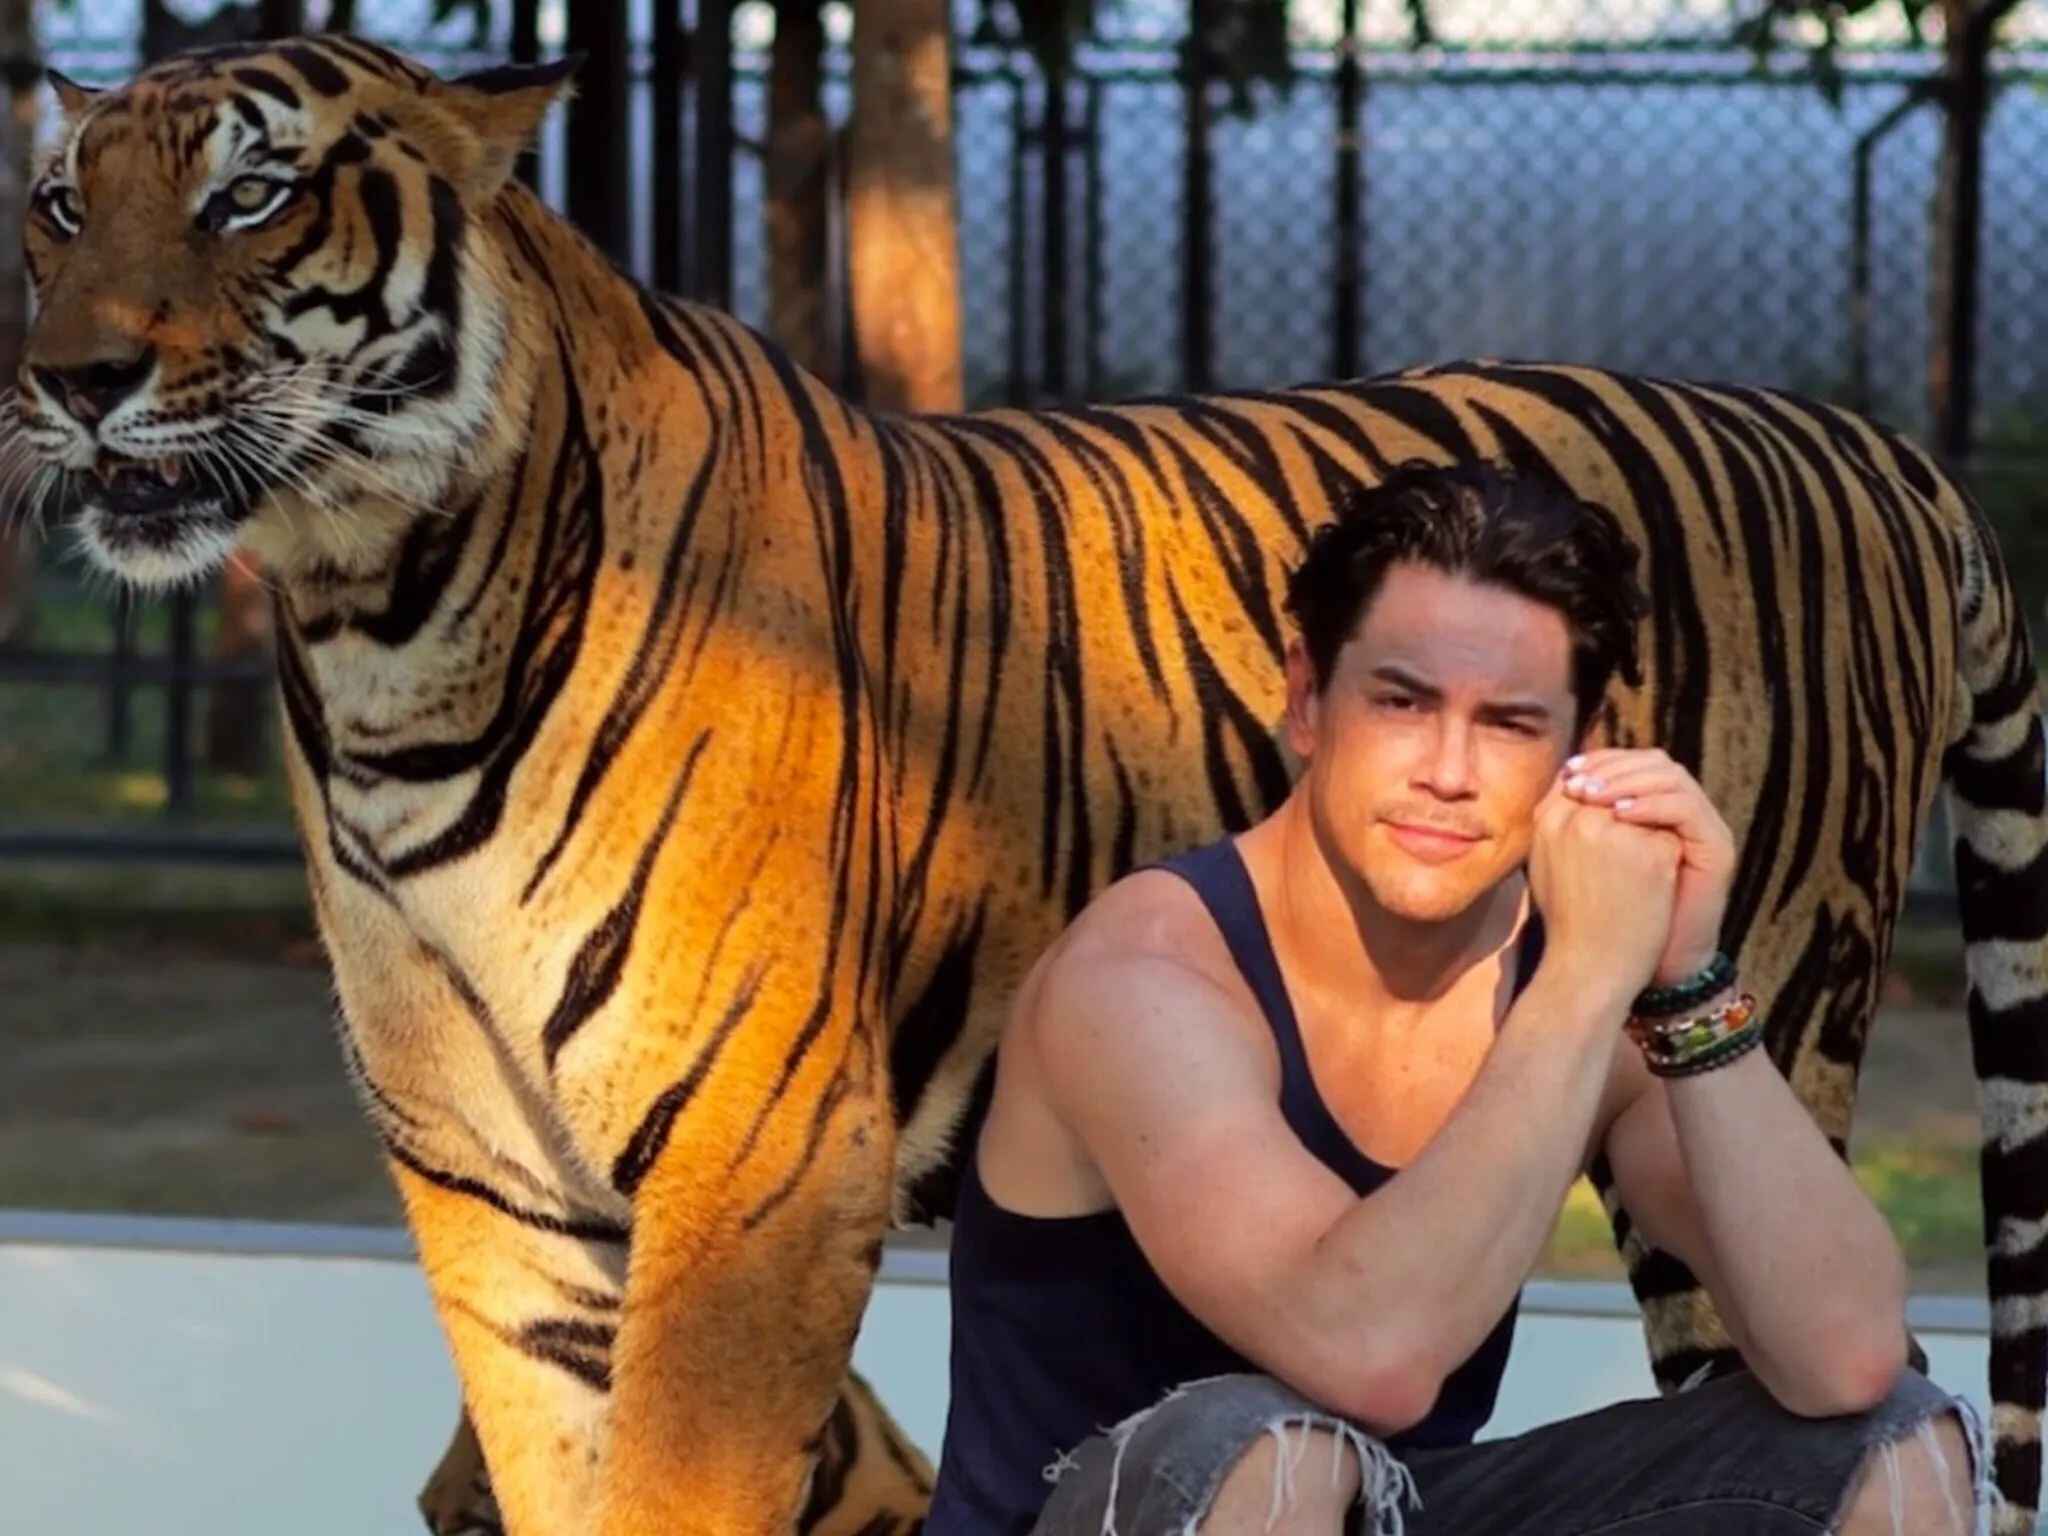 tom-sandoval-criticized-by-peta-for-posing-with-tiger-at-thailand-zoo